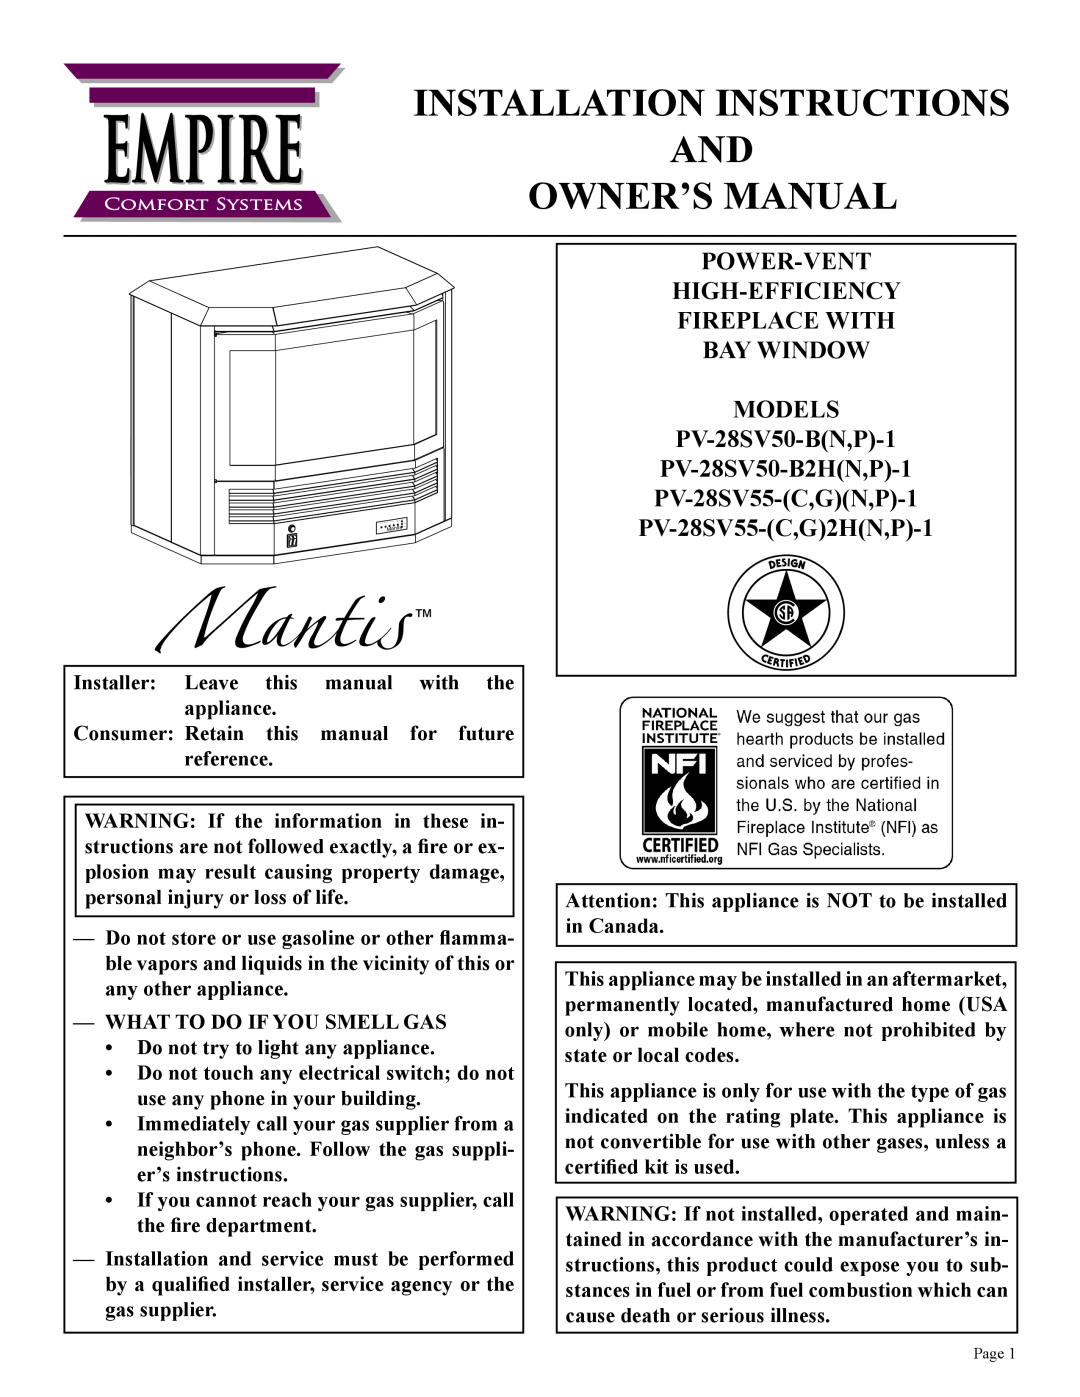 Empire Comfort Systems PV-28SV50-B(N,P)-1 installation instructions Power-Vent High-Efficiency Fireplace With, Empire 